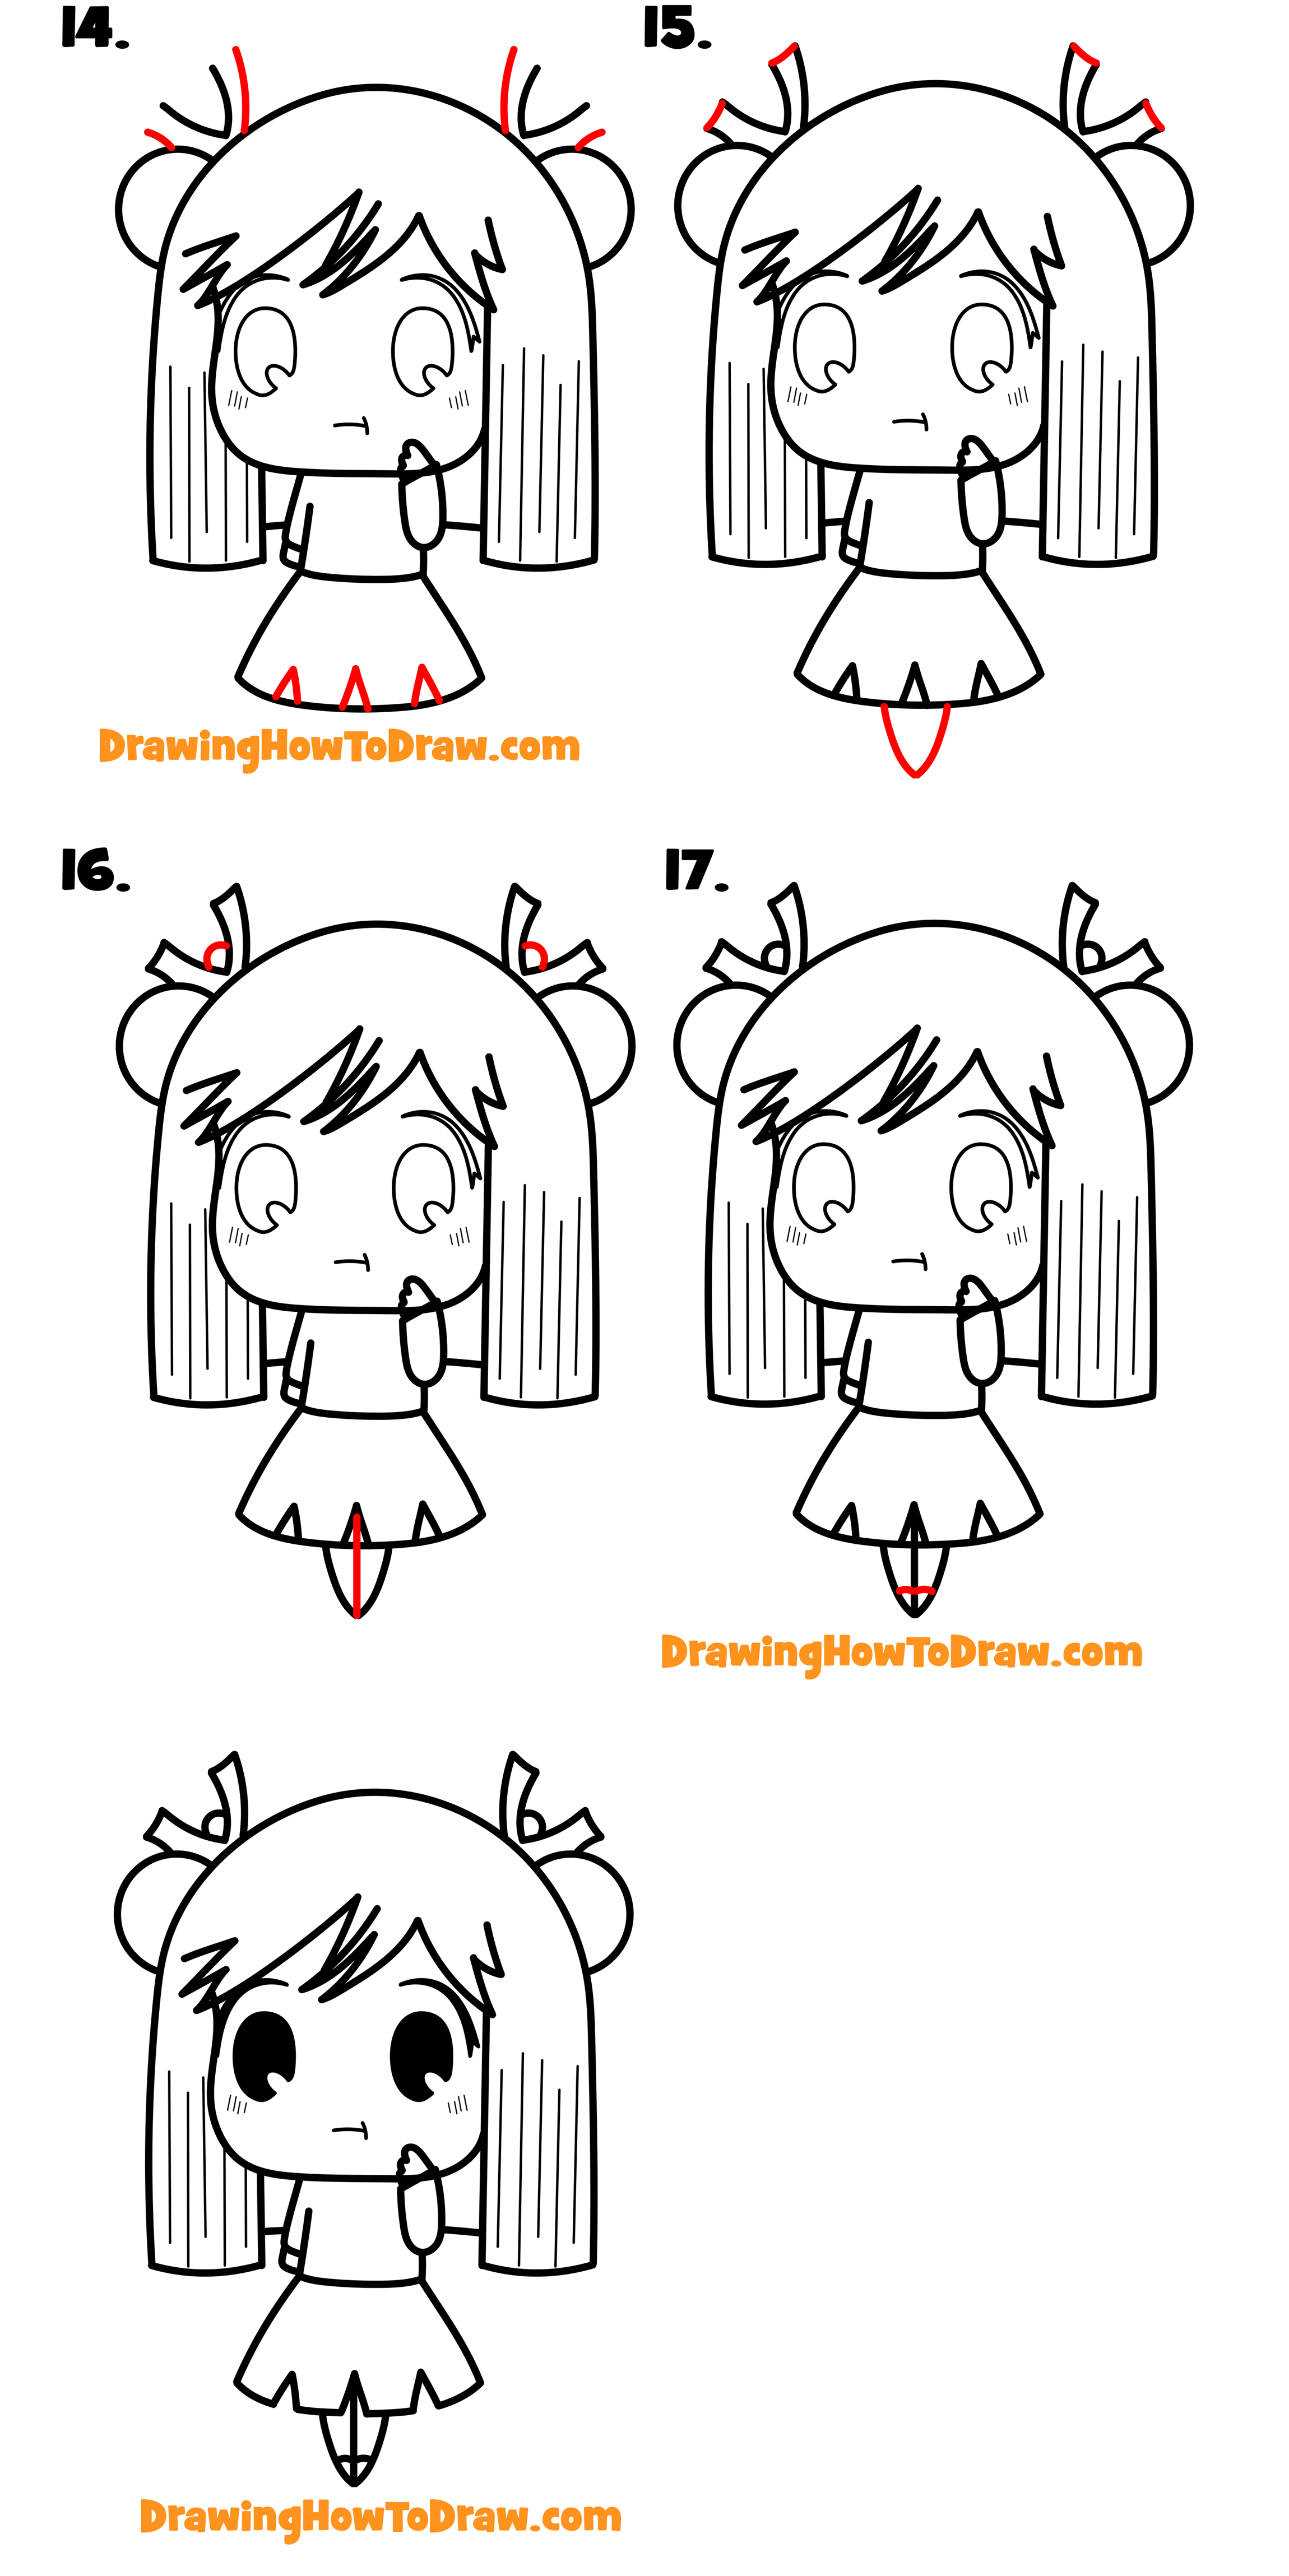 44 Easy Drawing Ideas For Girls: Drawing Females For Beginners